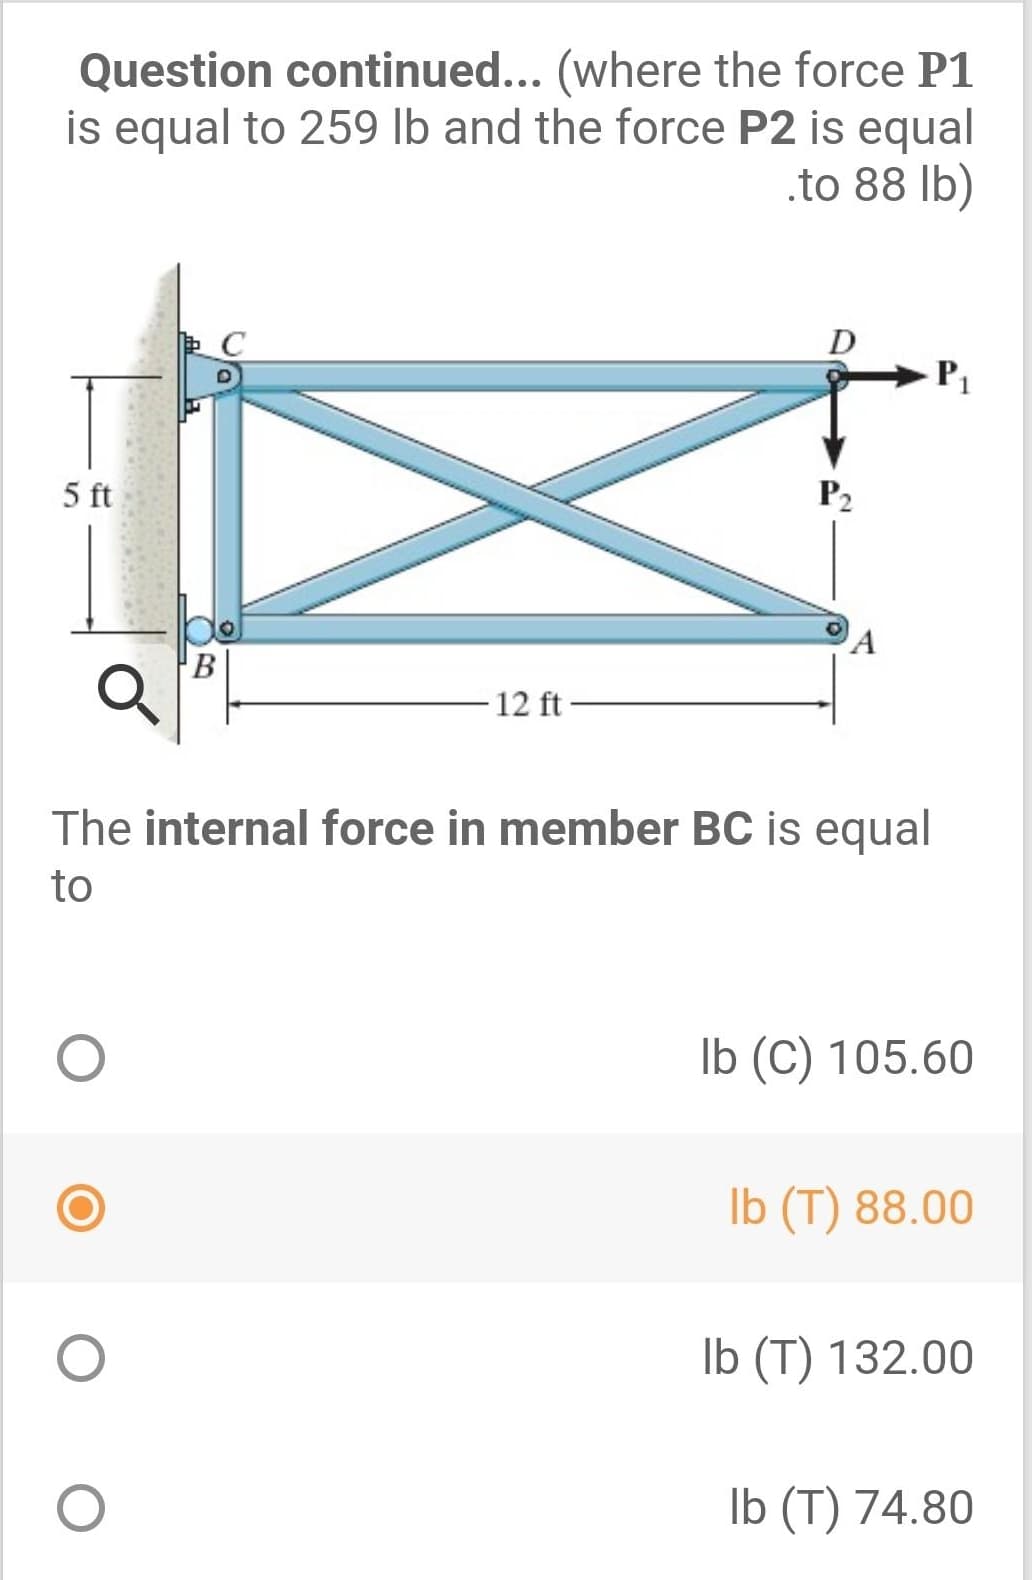 Question continued... (where the force P1
is equal to 259 lb and the force P2 is equal
.to 88 lb)
D
5 ft
P2
B
12 ft
The internal force in member BC is equal
to
Ib (C) 105.60
Ib (T) 88.00
Ib (T) 132.00
Ib (T) 74.80
